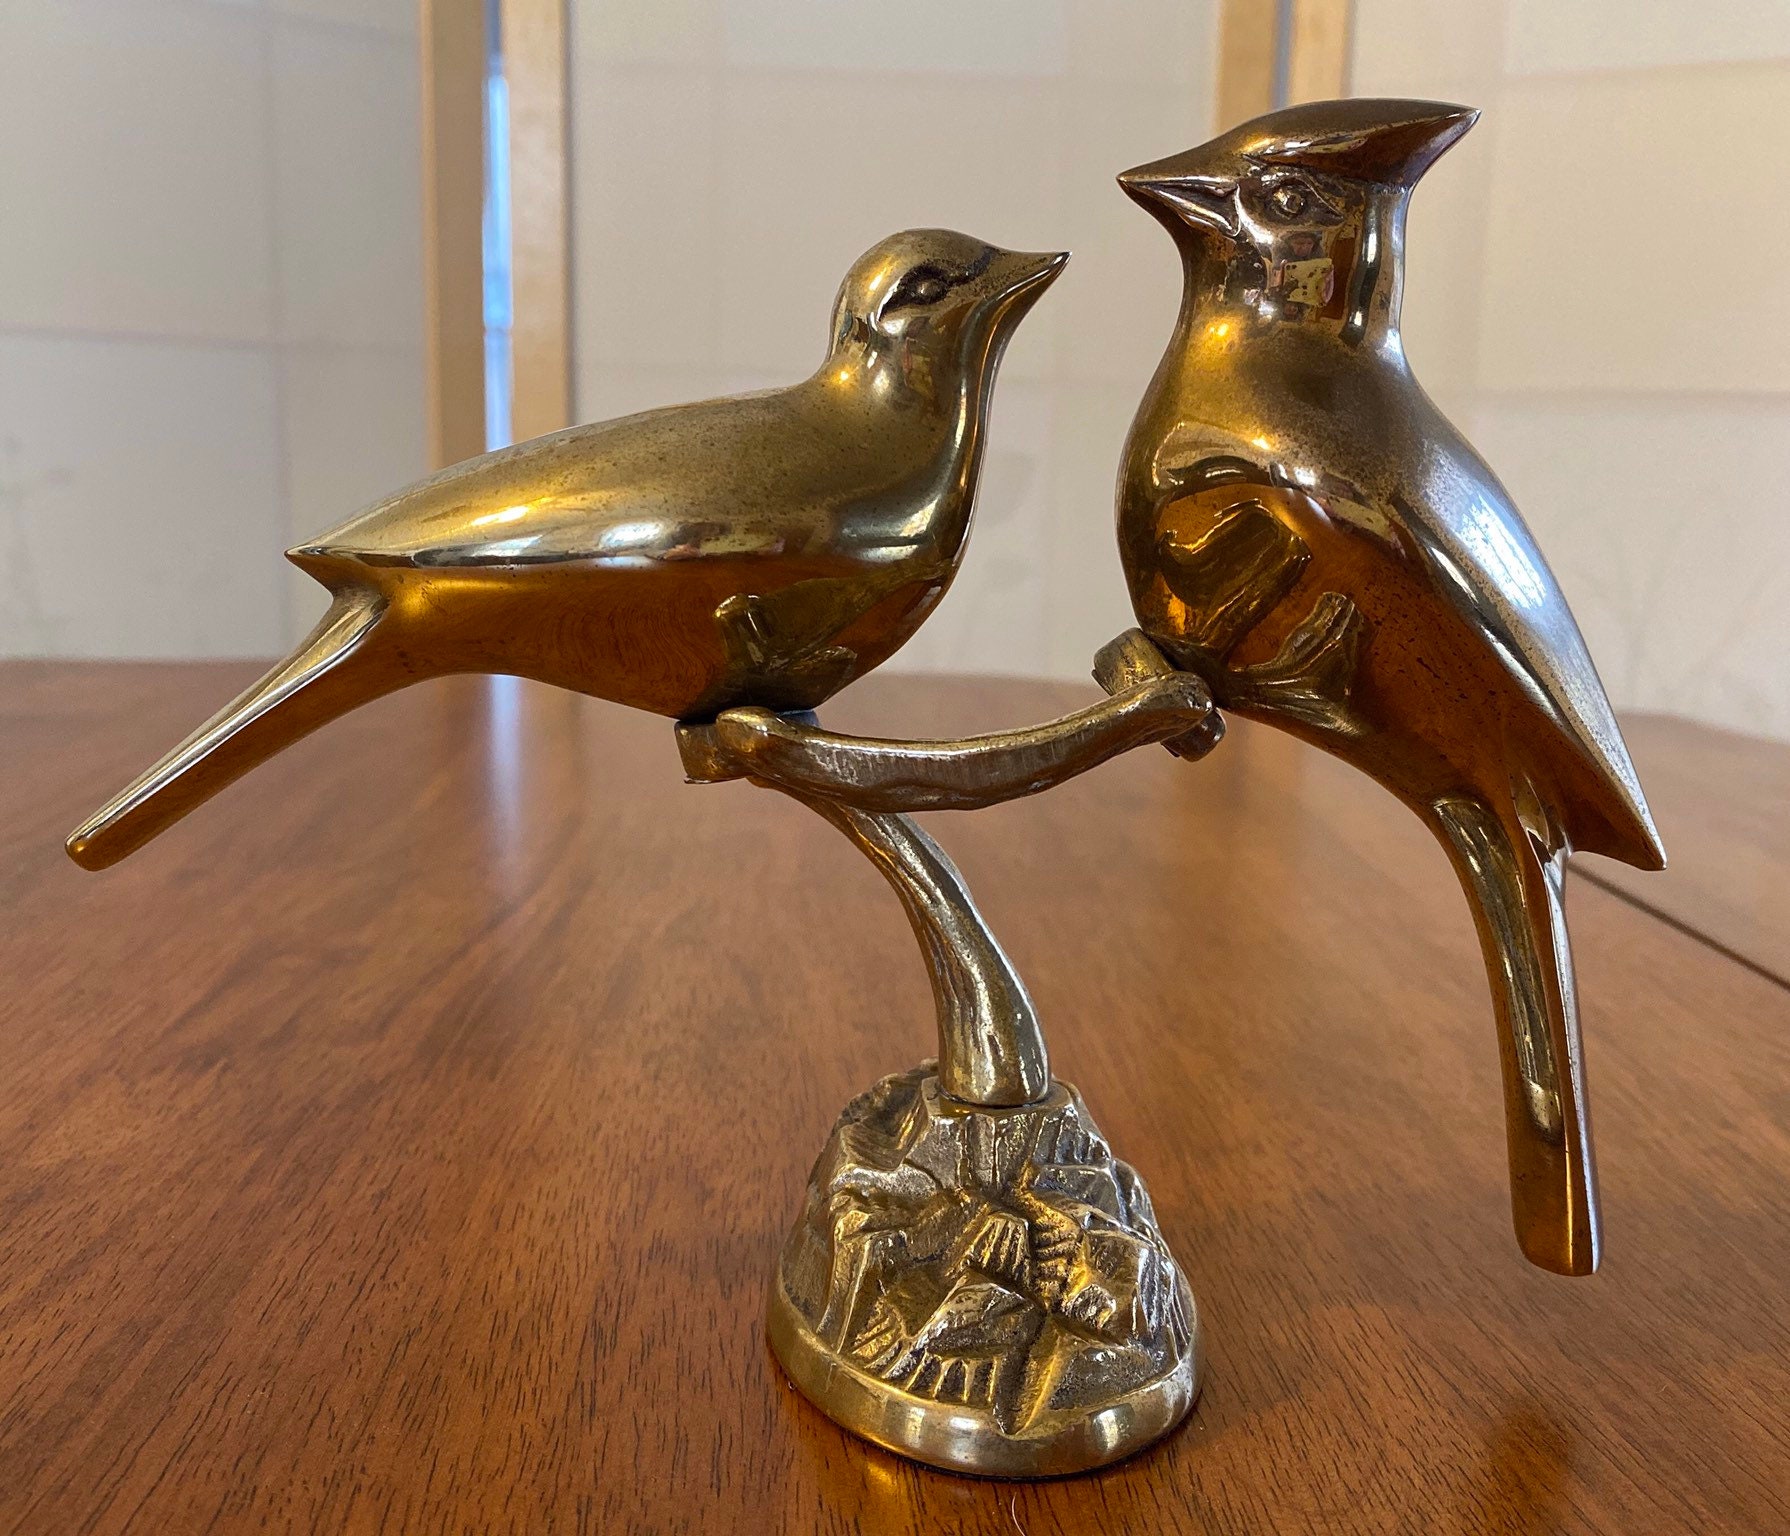 Vintage Solid Brass Bird on a Limb Figure FigurineGreat gift for Mother\u2019s Or Father\u2019s Day!